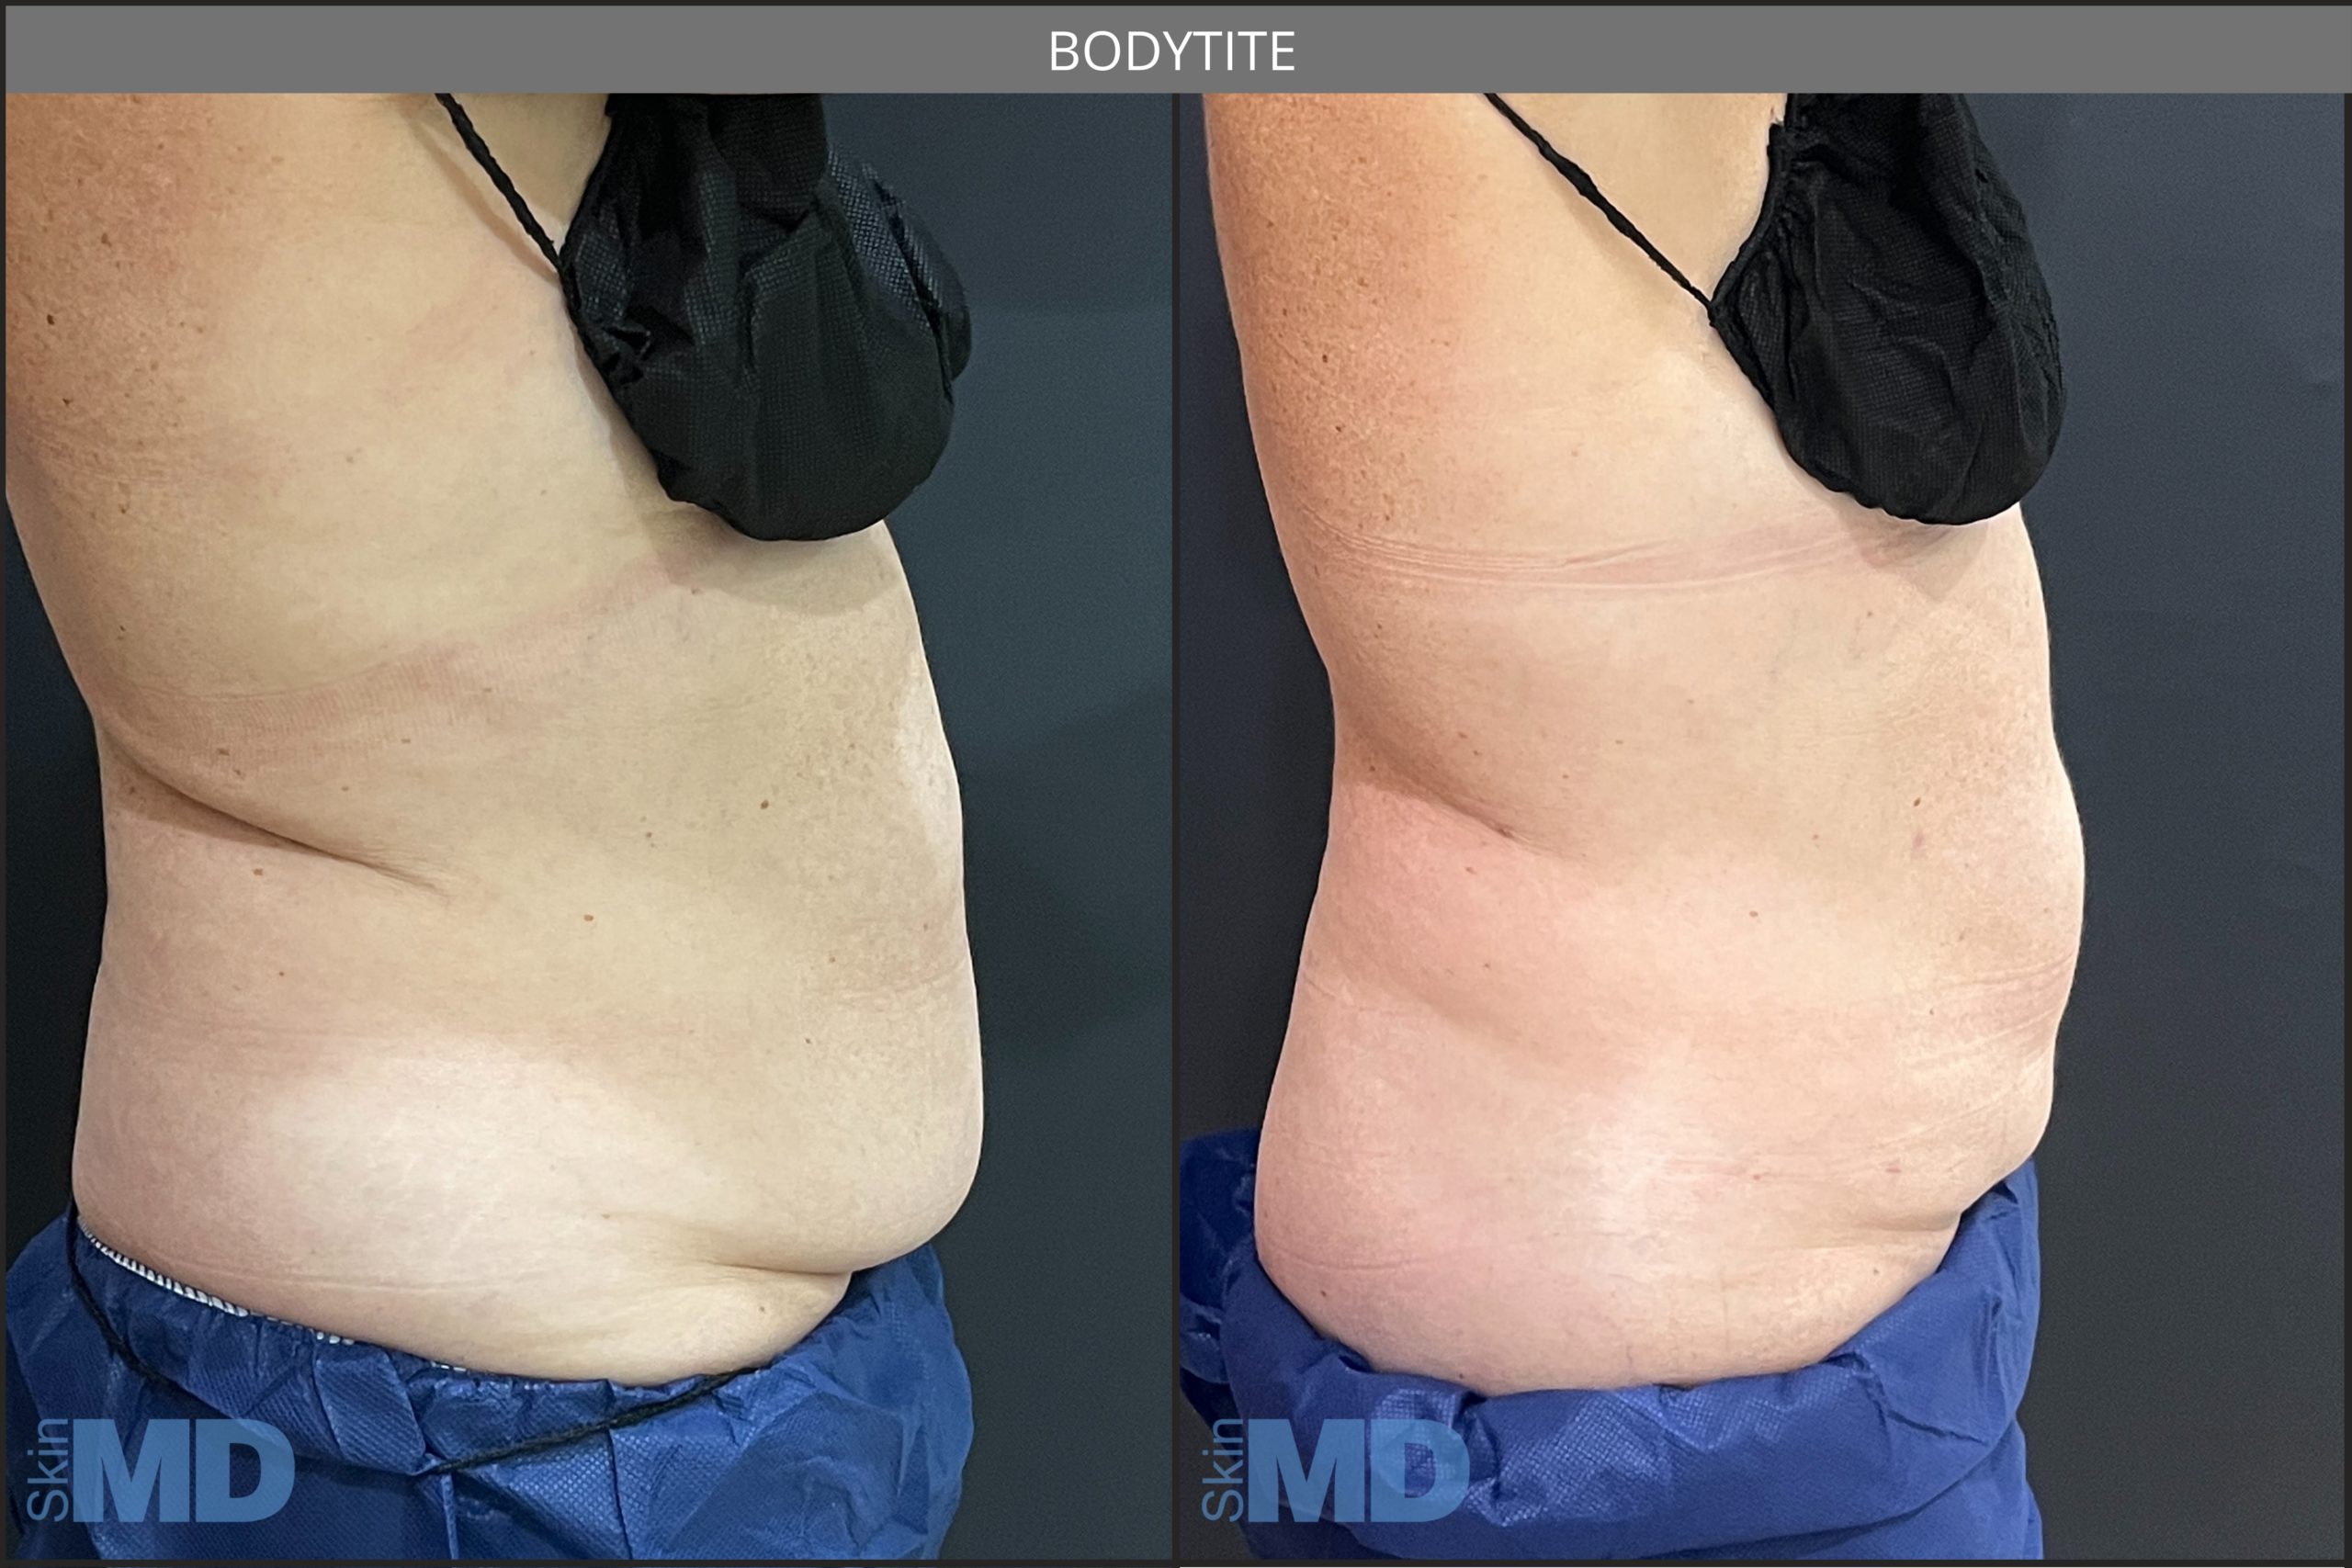 Before and after BodyTite results